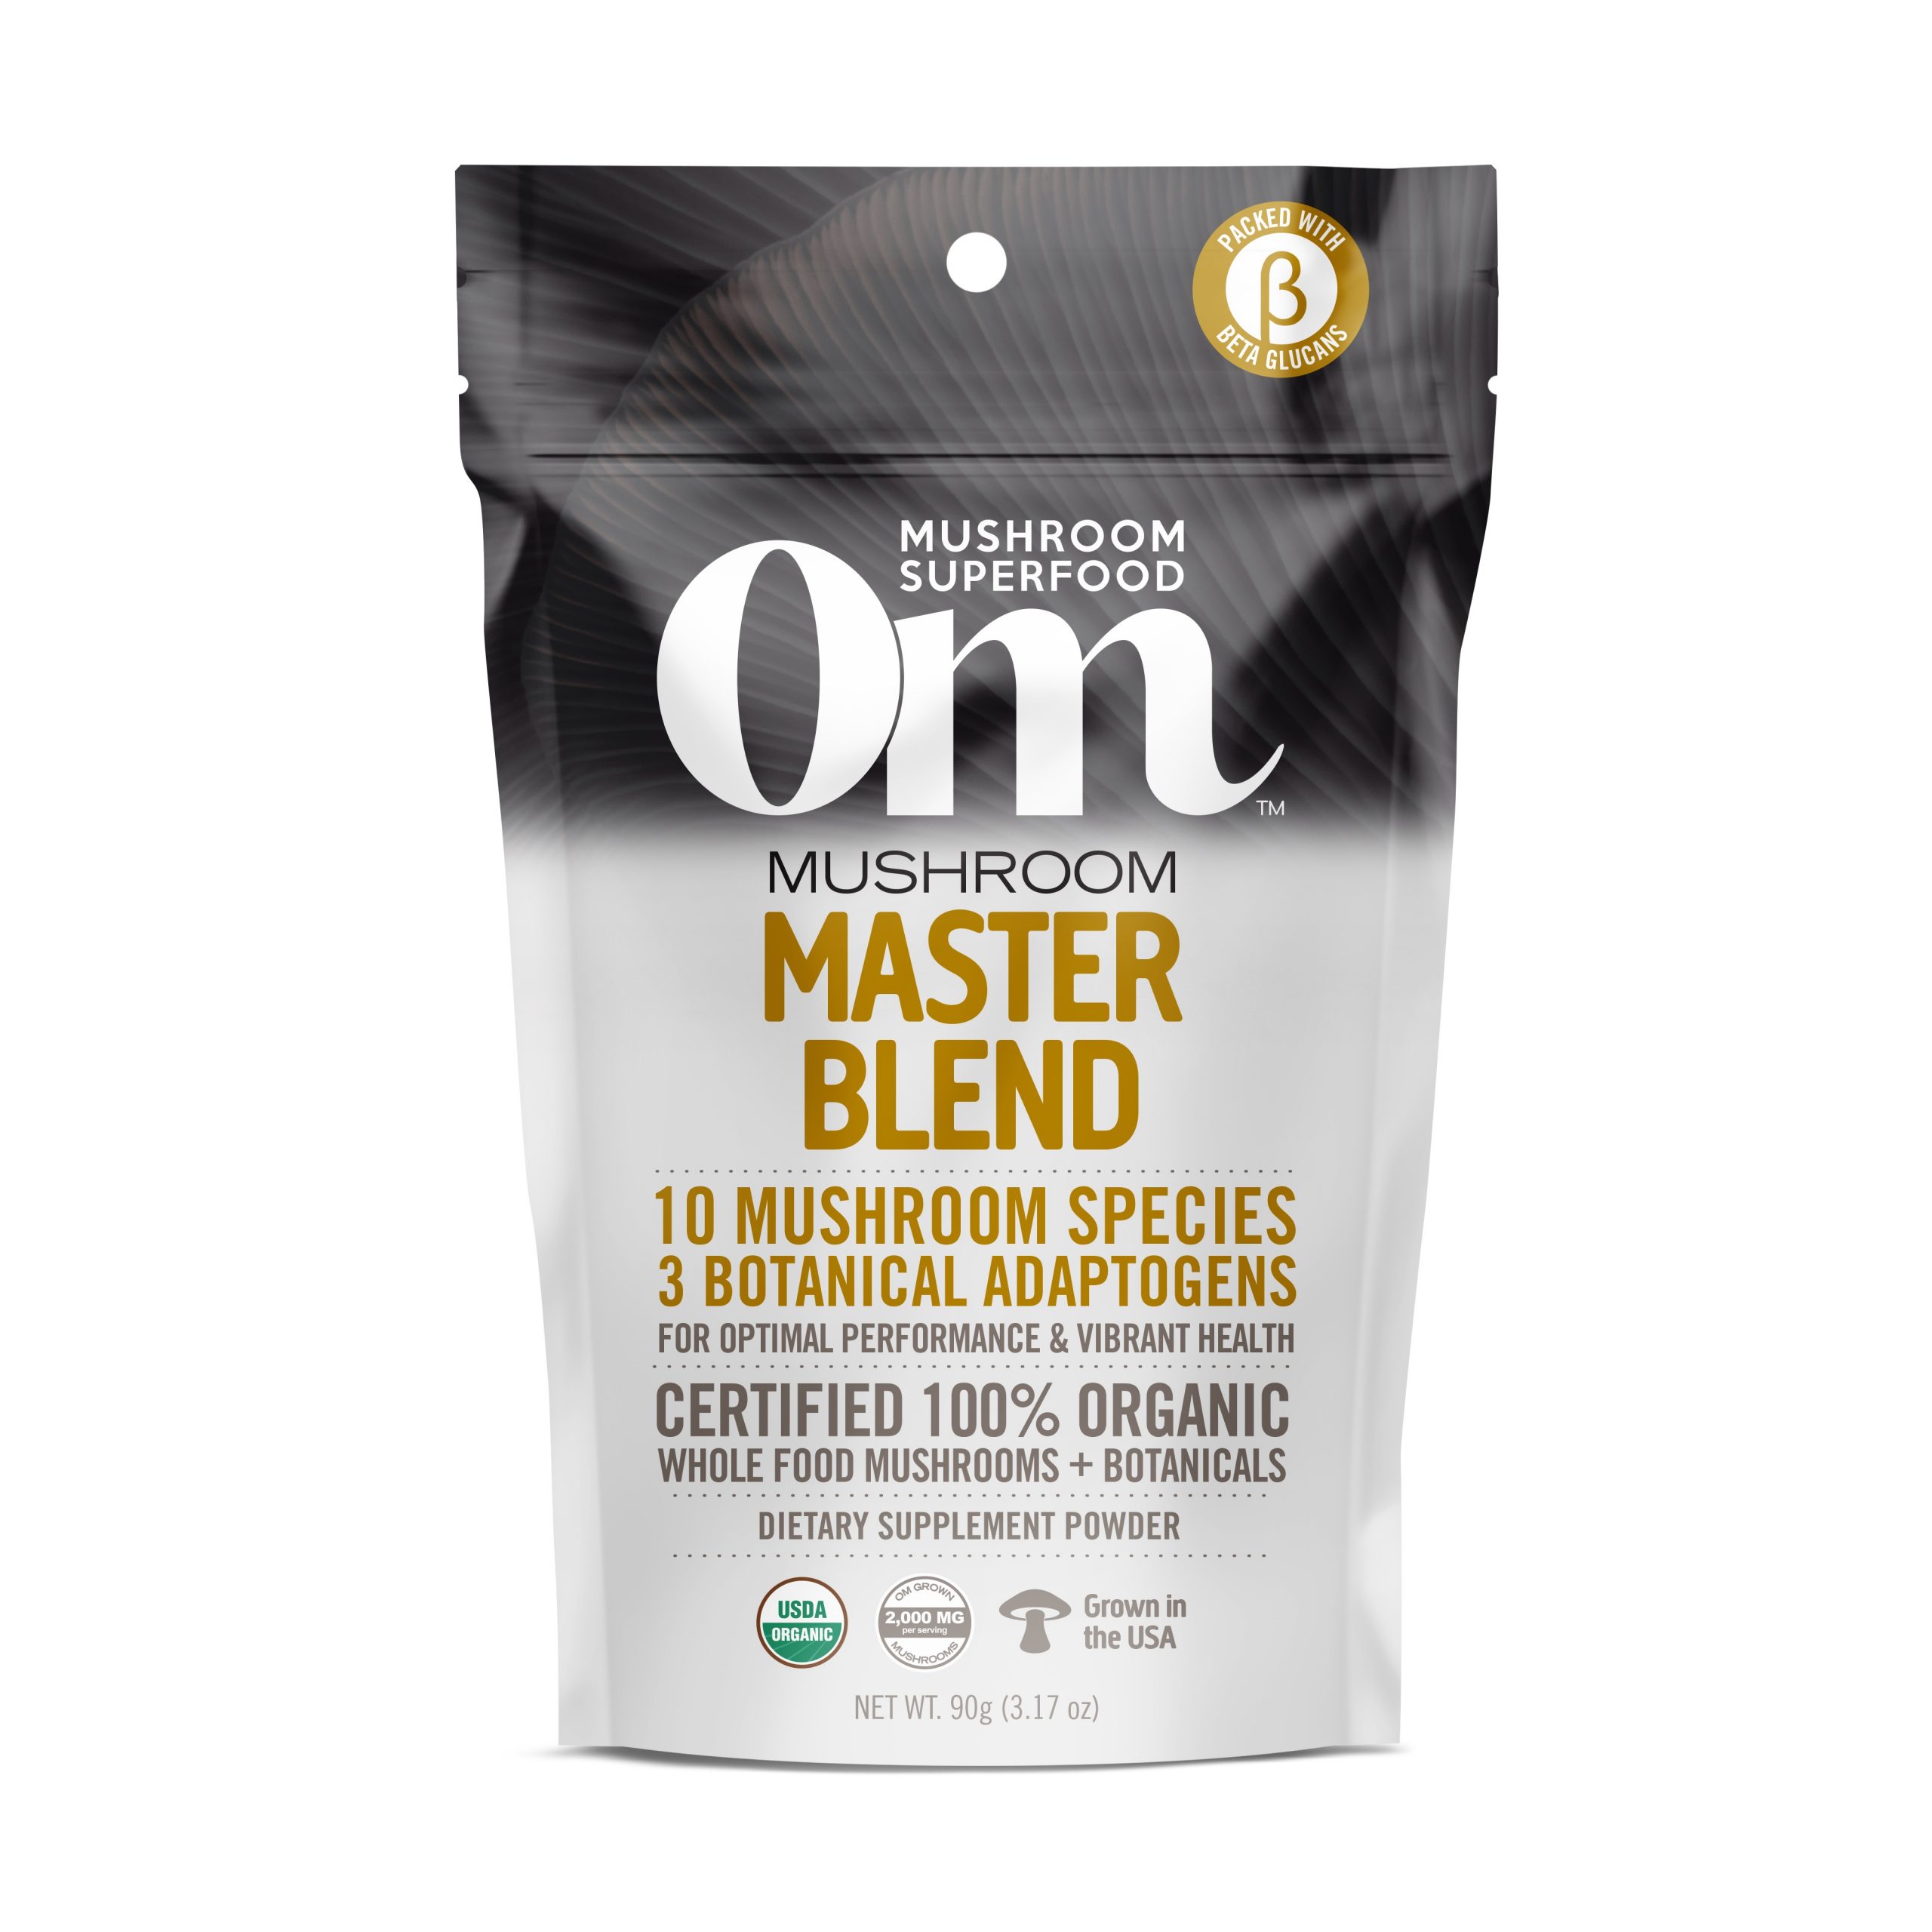 New Om Mushroom Superfood Products Make Mushrooms a Daily Routine